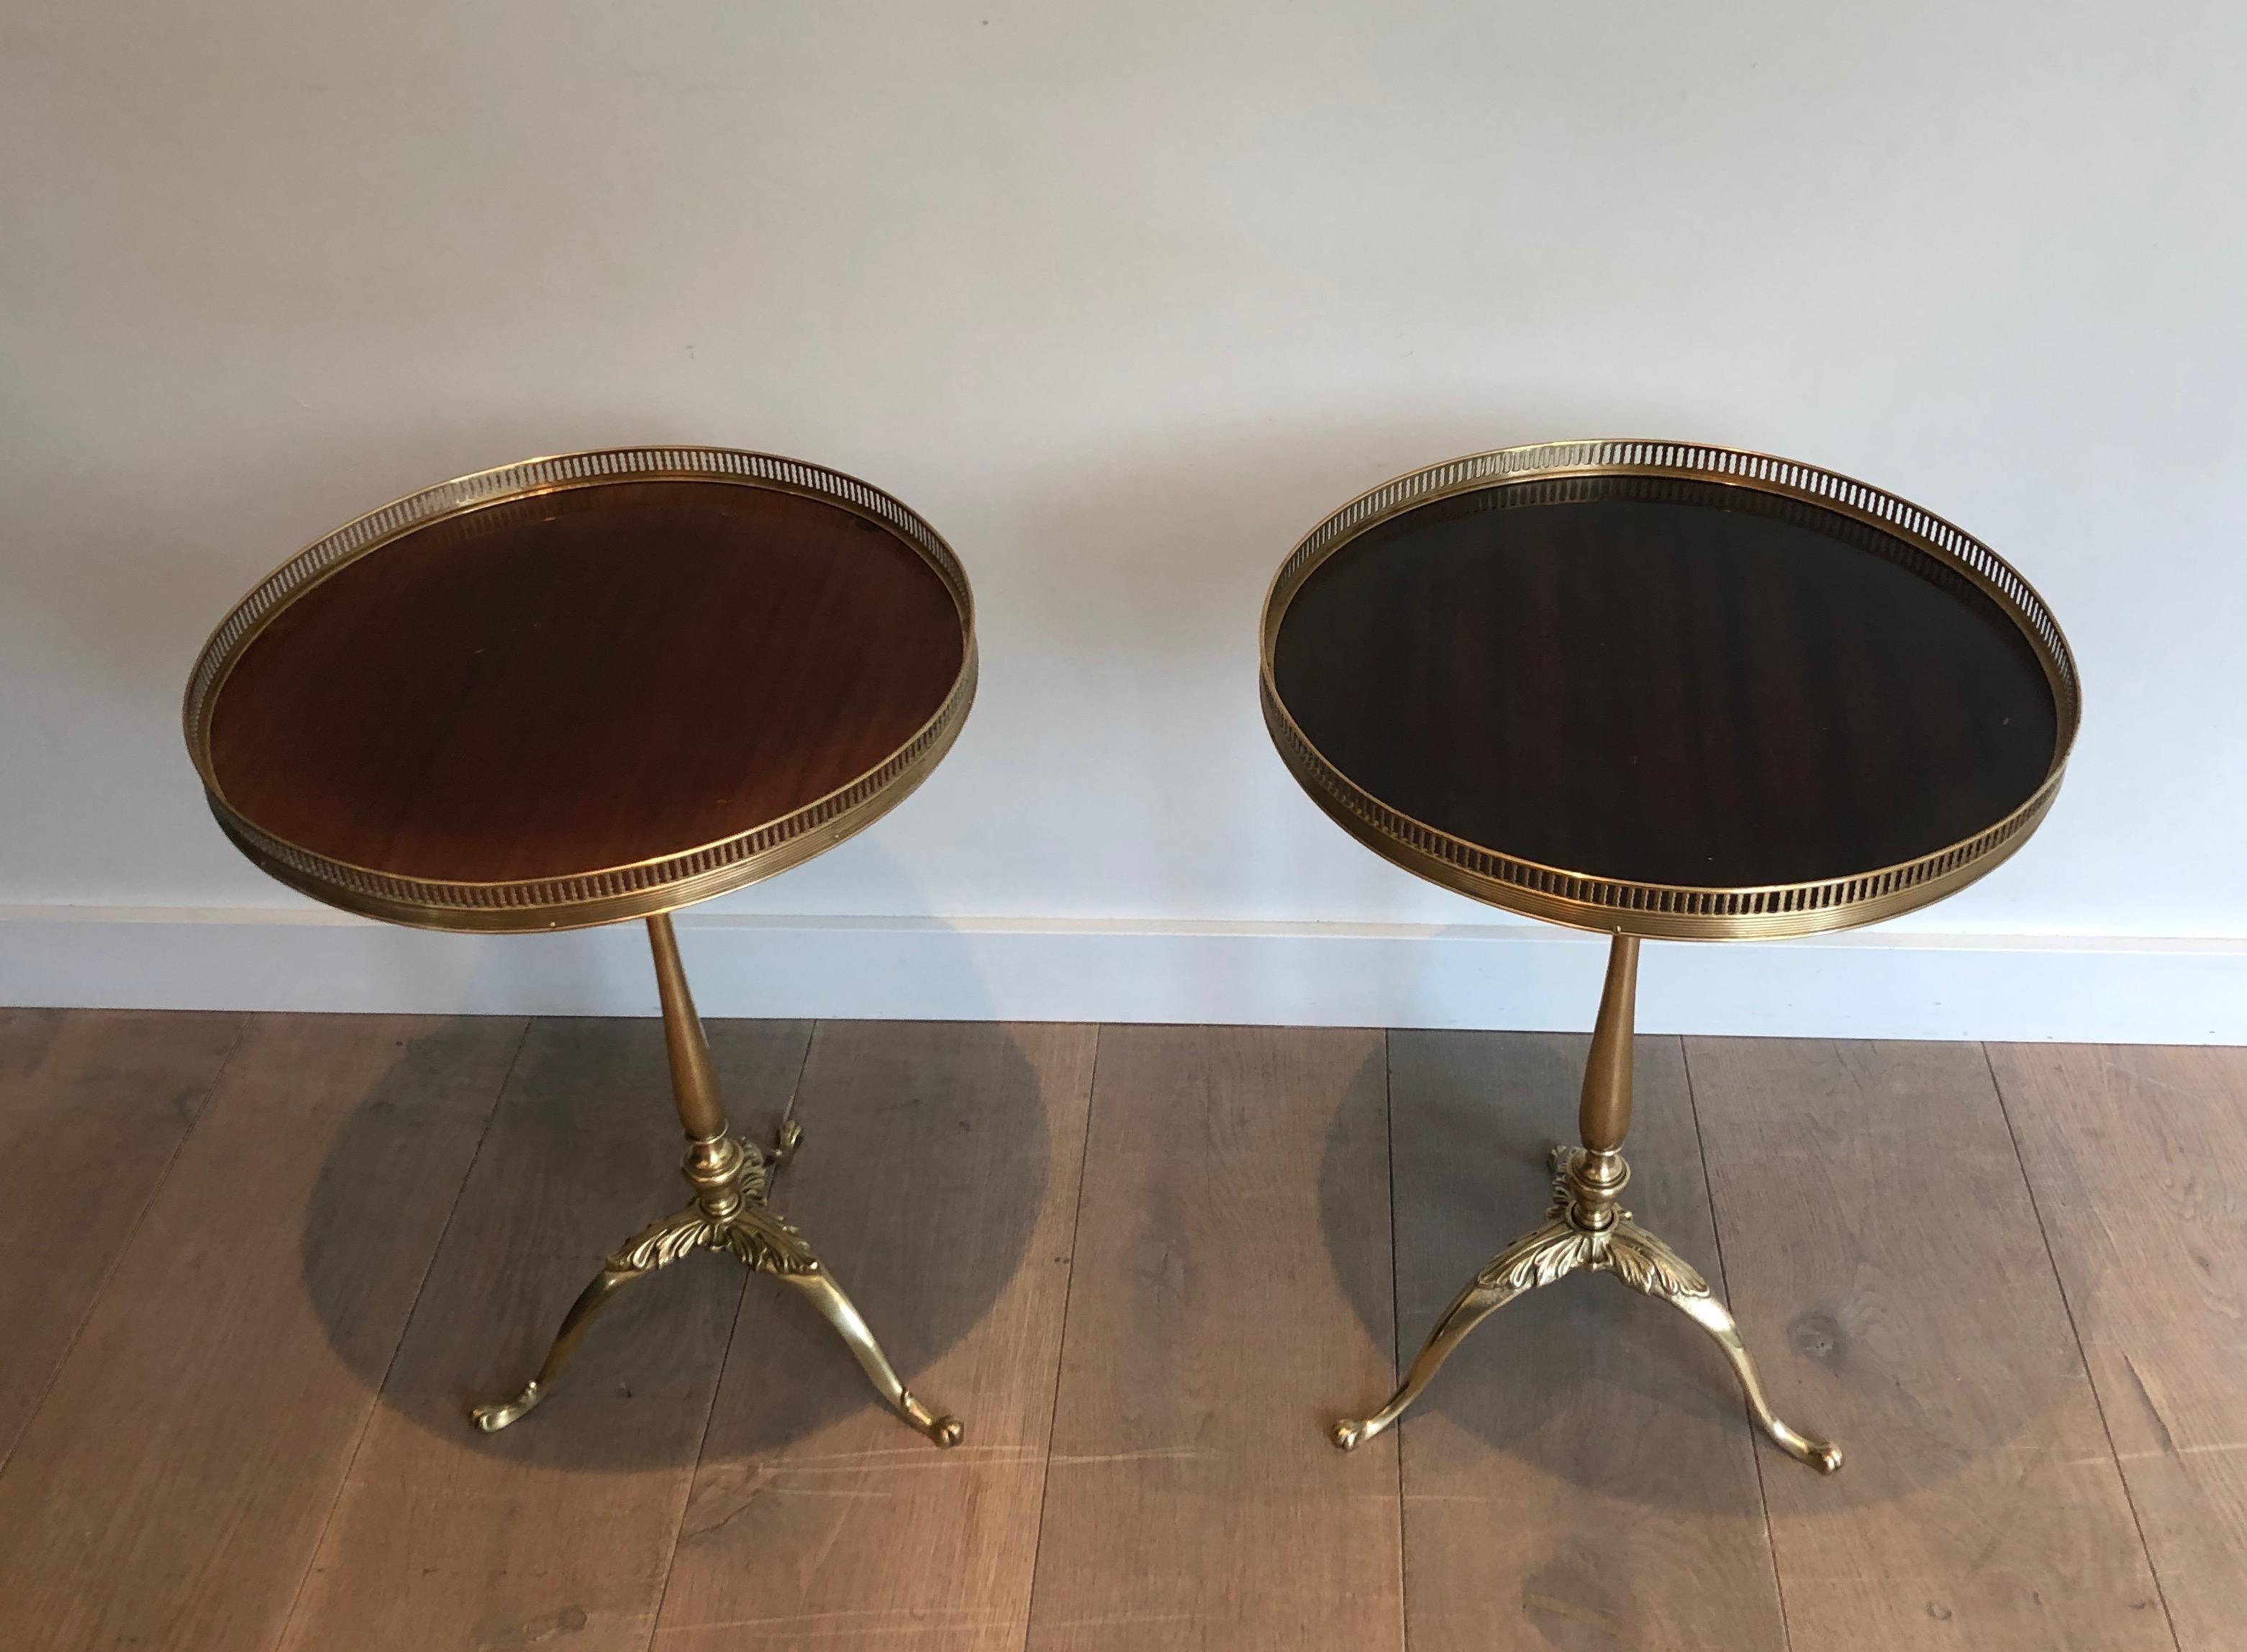 This nice pair of neoclassical style side tables also called Martini tables are made of brass and mahogany. These end tables are attributed to famous French designer Maison Jansen, circa 1940
We have 3 of these tables.